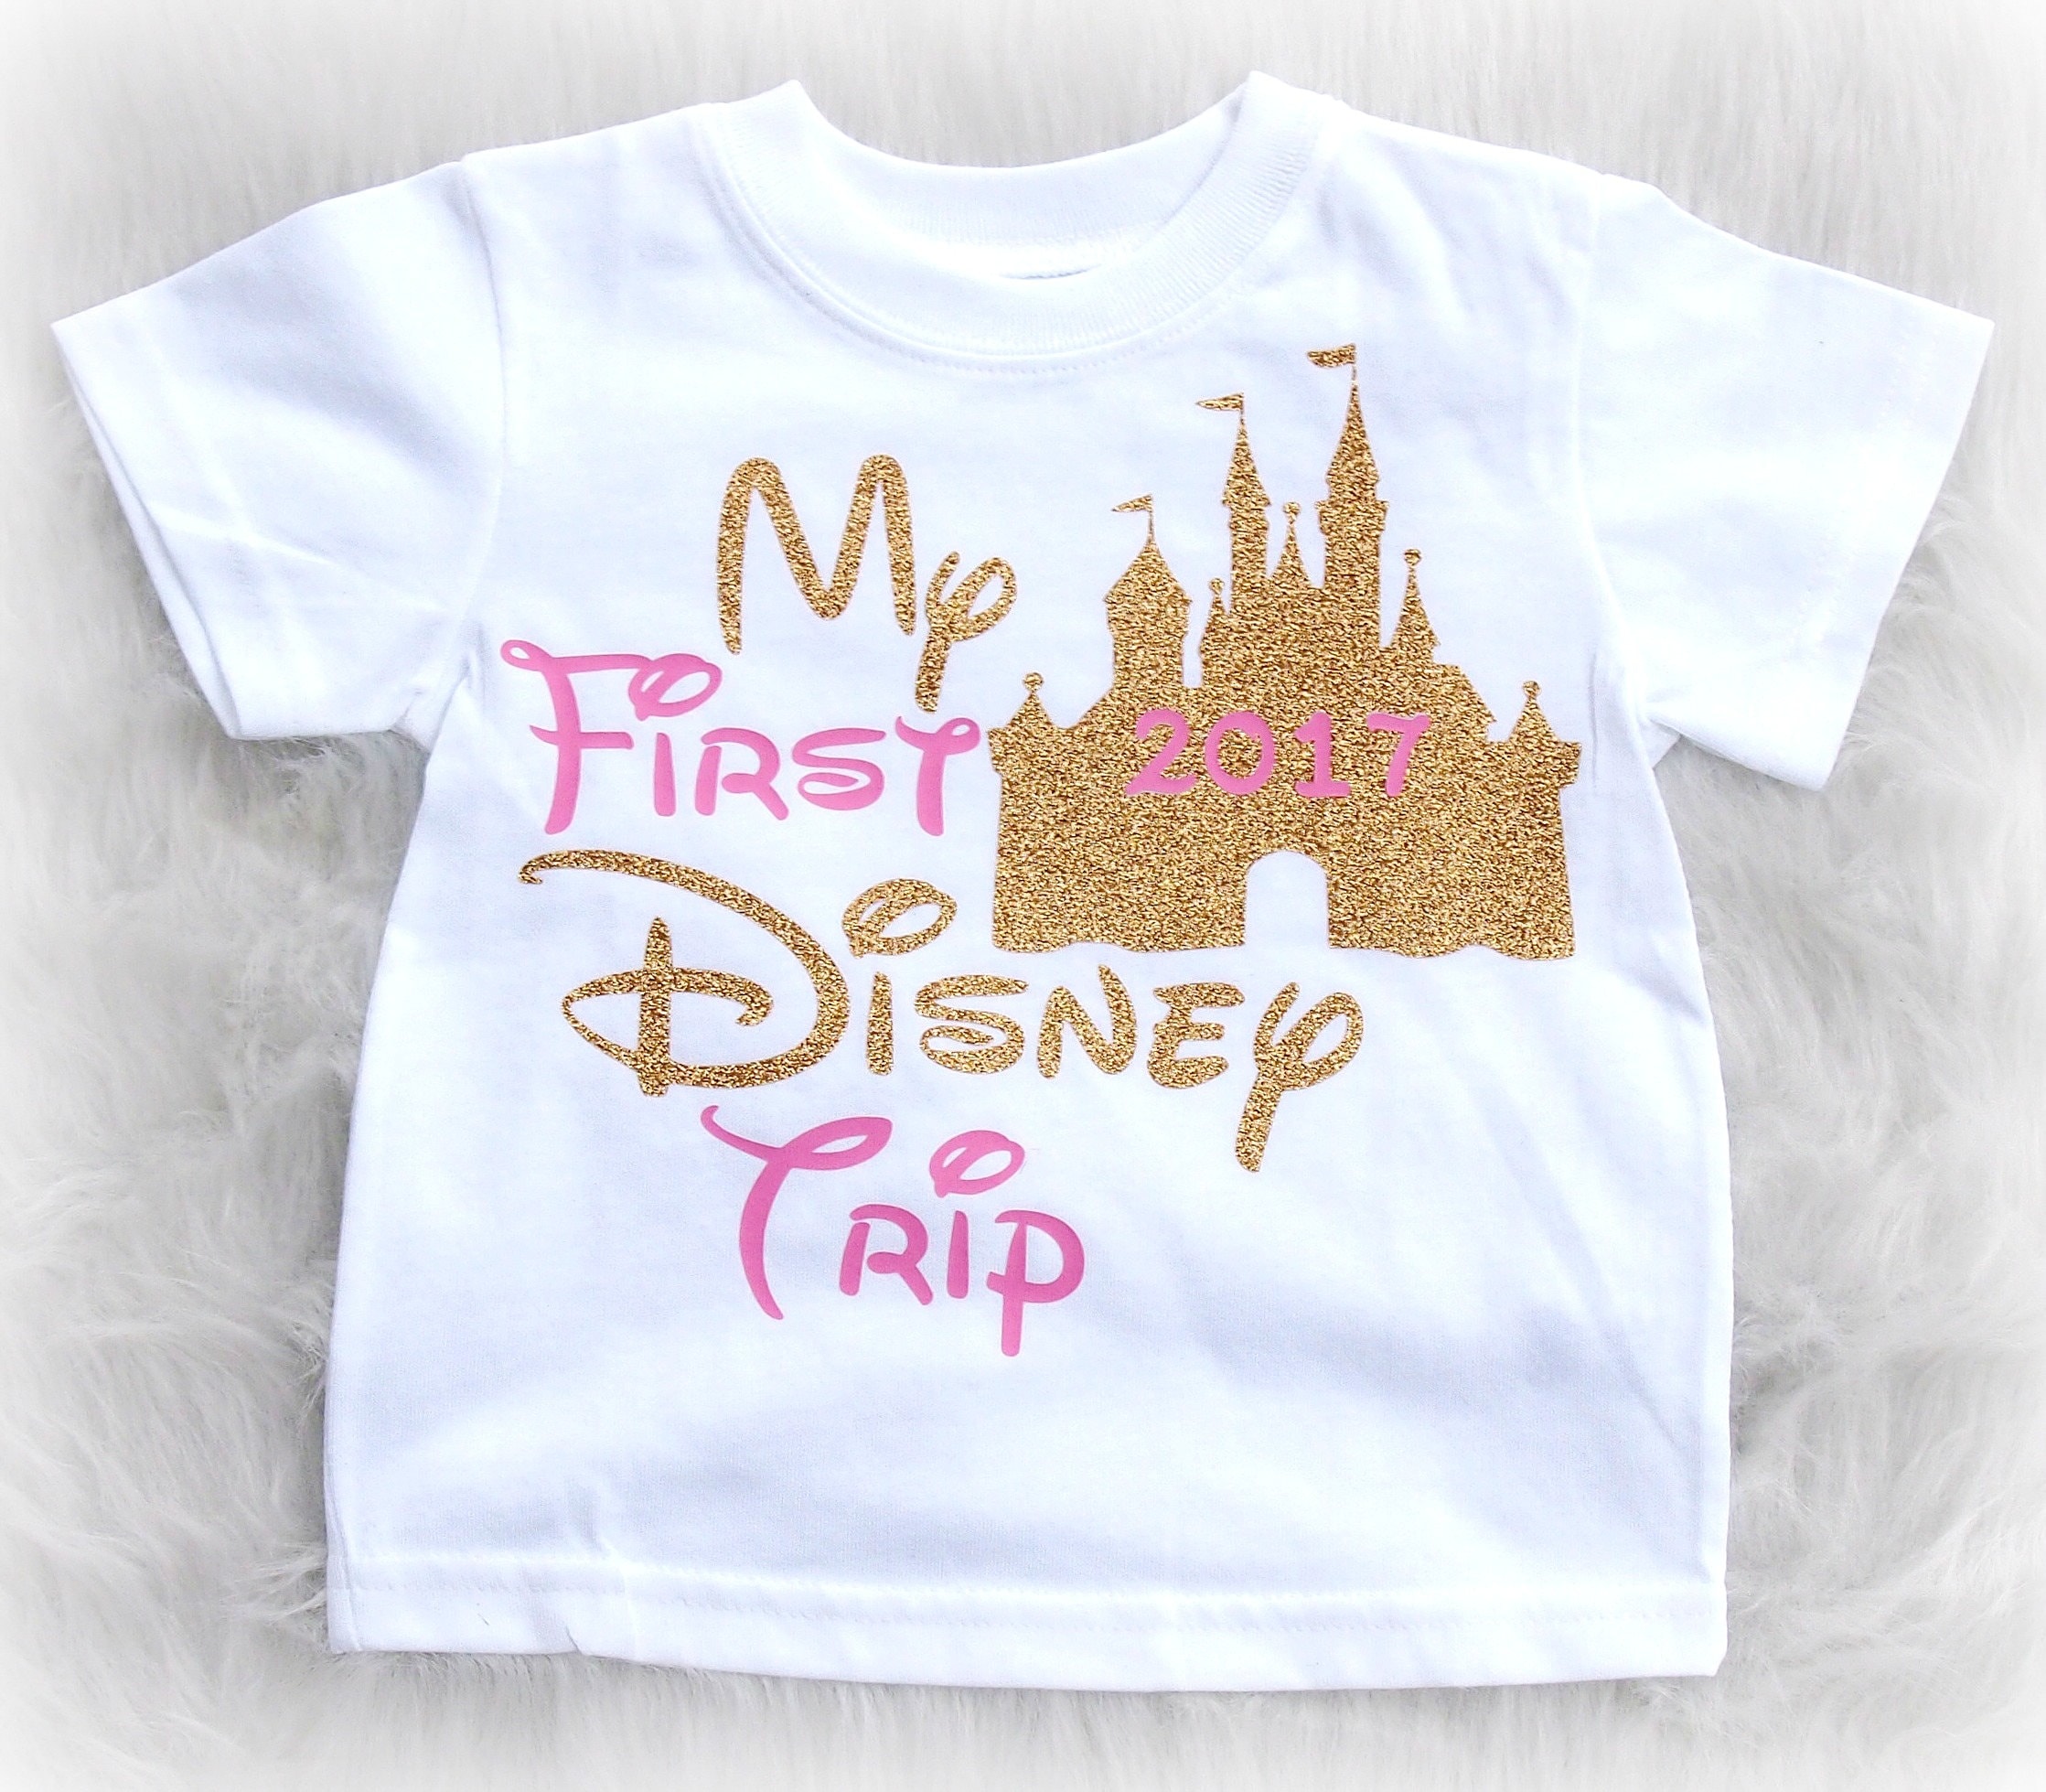 My first disney trip shirt for girls pink and gold disney